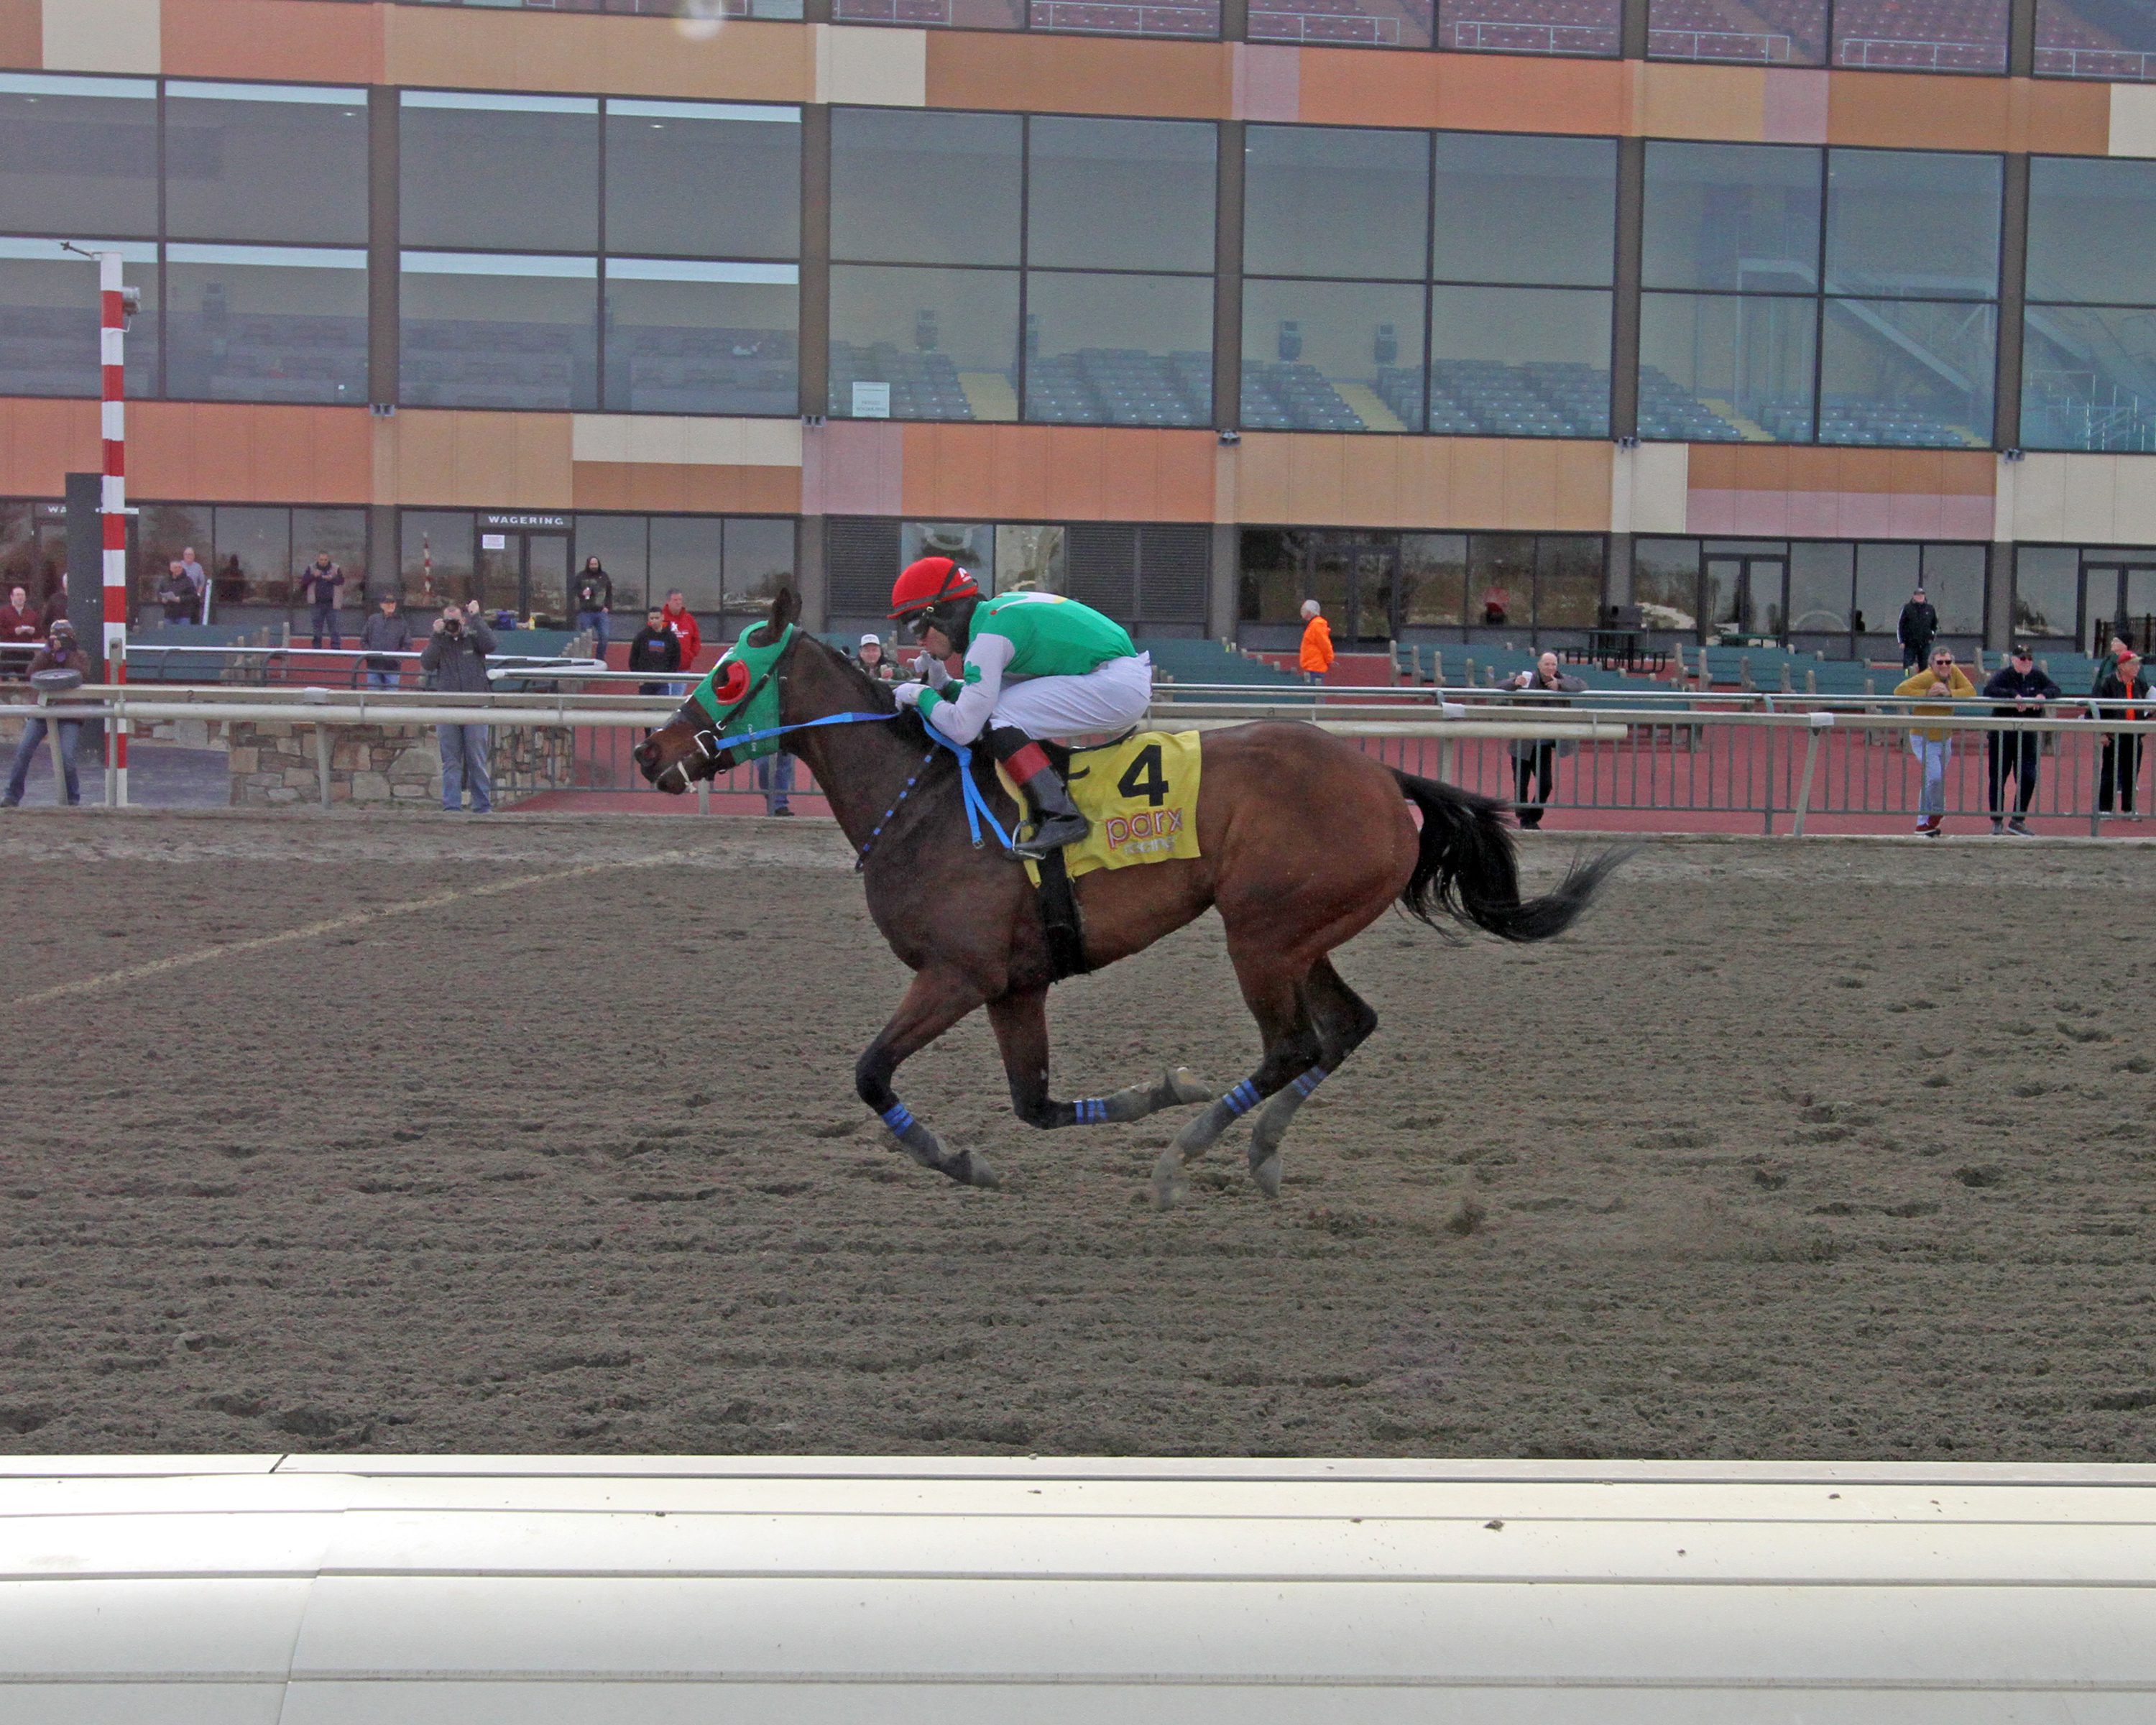 Helosthismarbles with Abner Adorno win Race 6 at Parx on March 8, 2022. Photo By: Chad B. Harmon